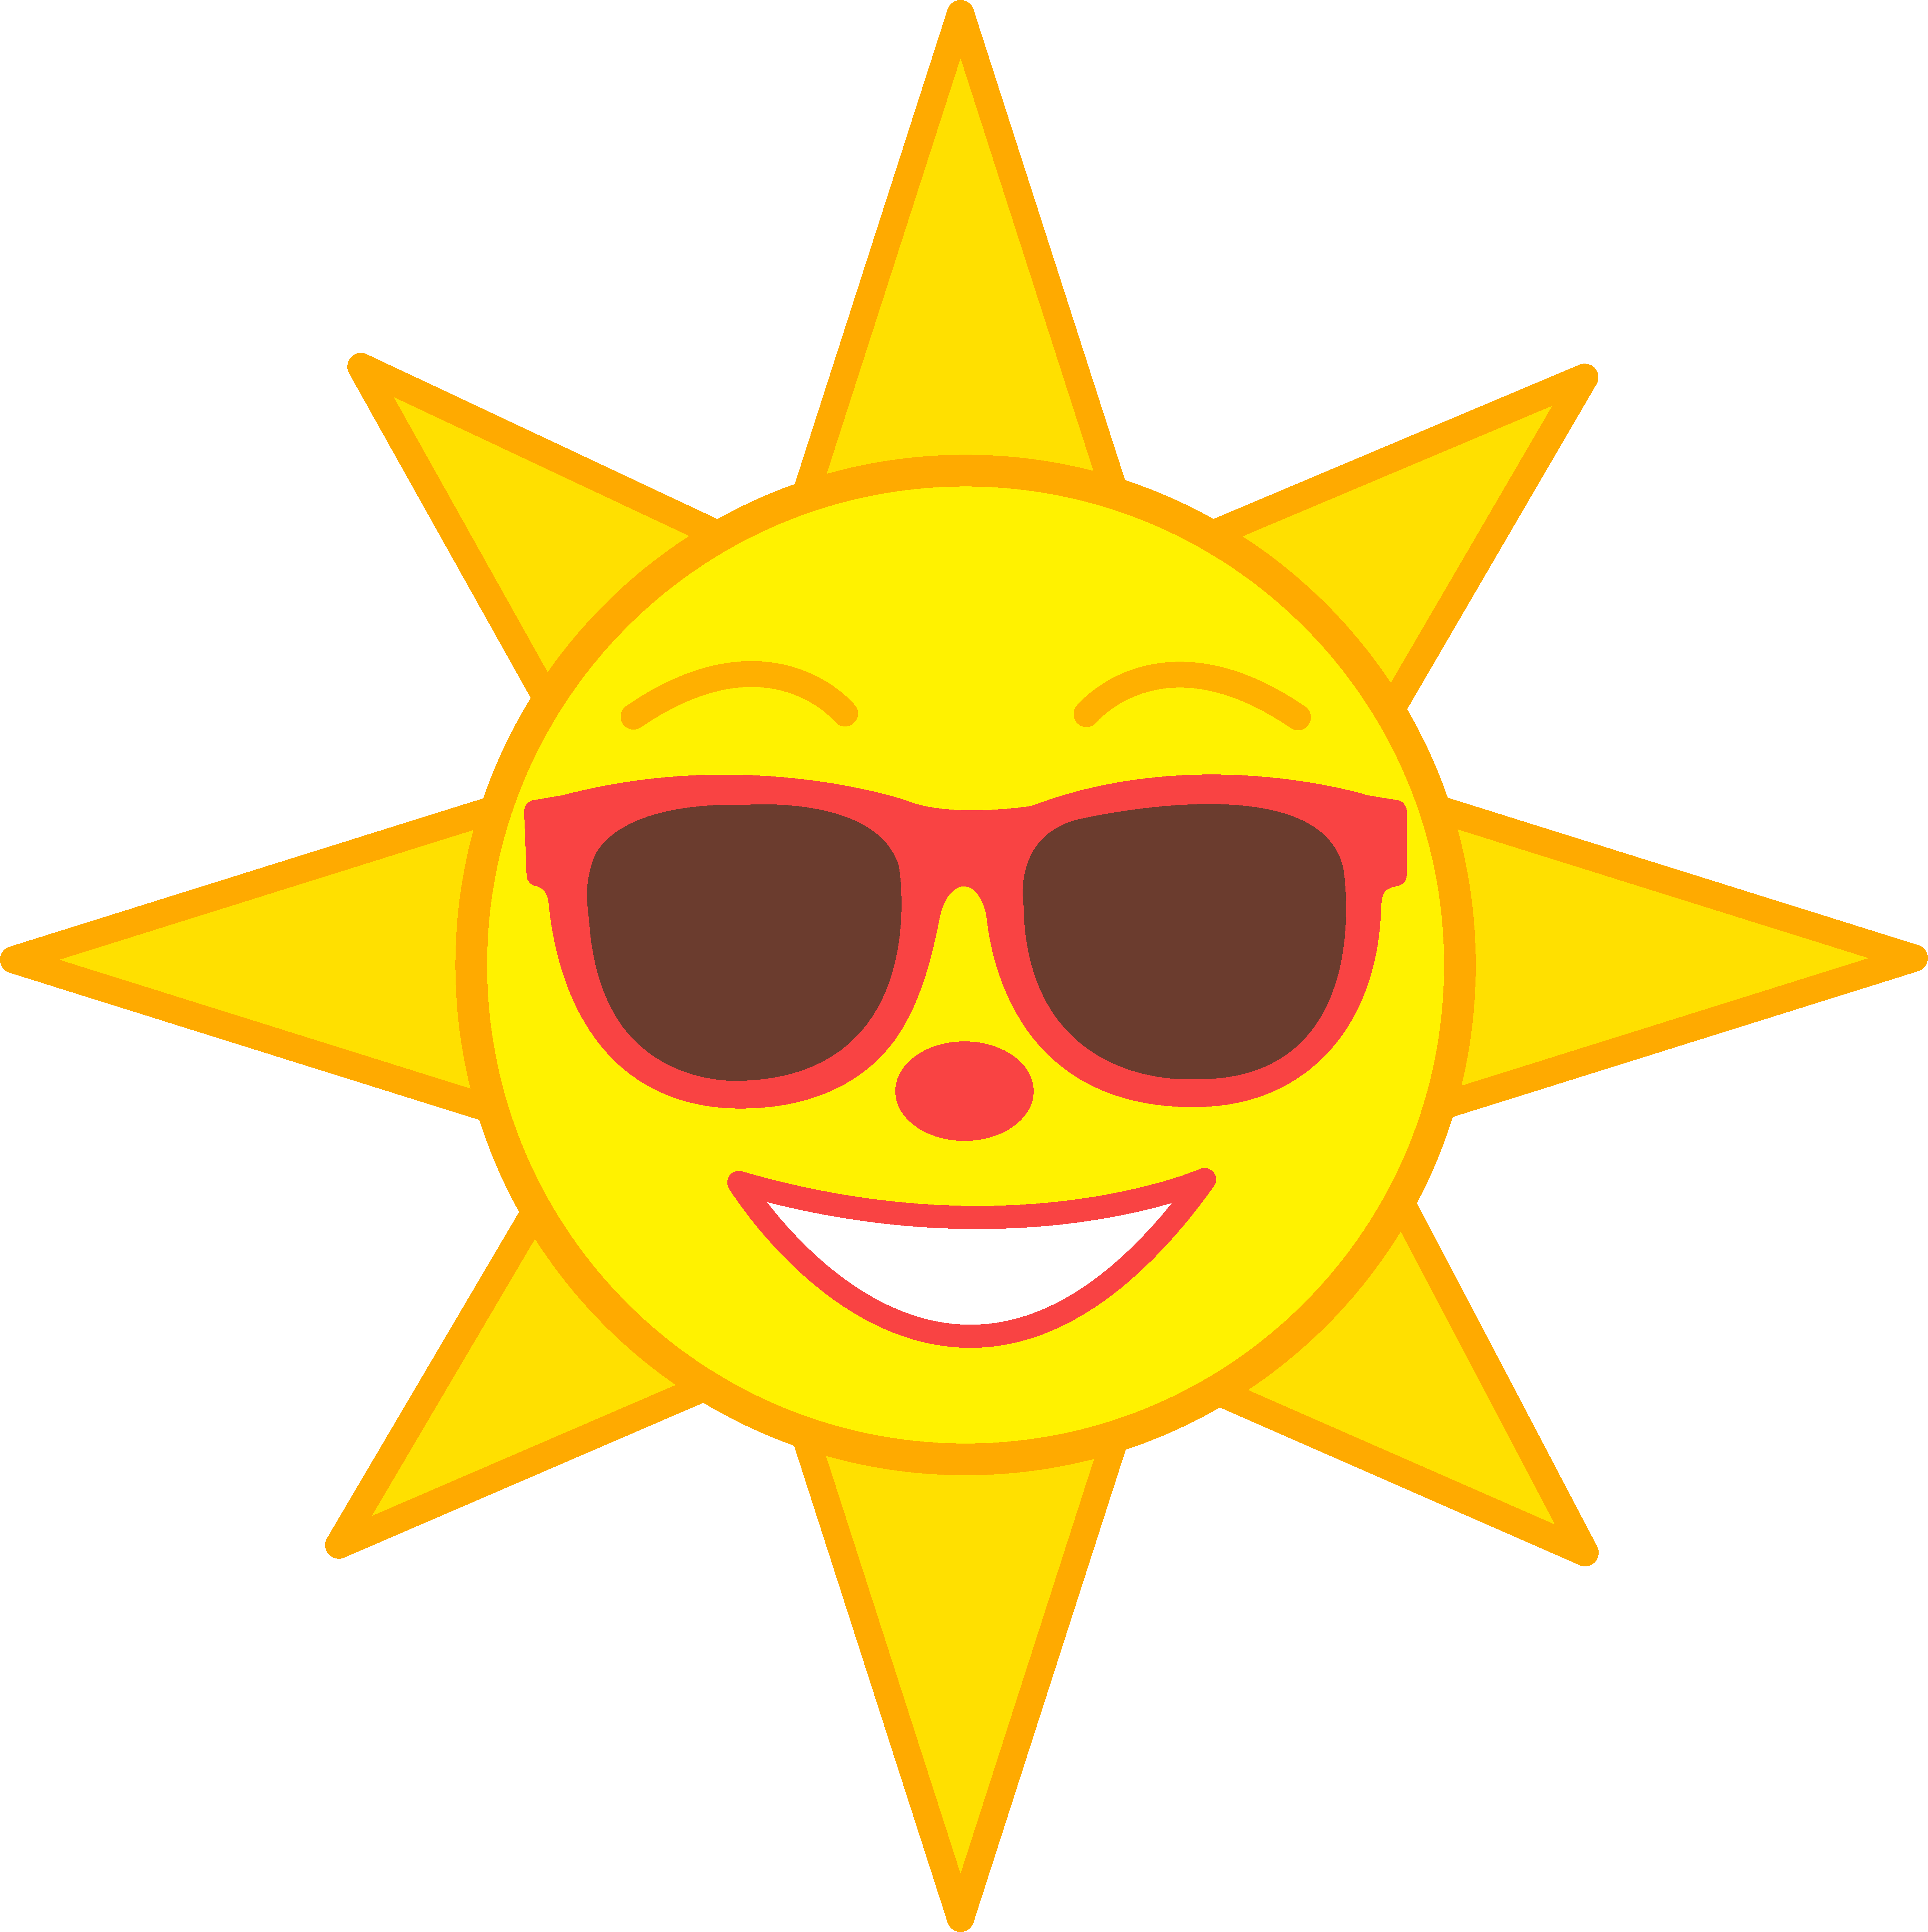 Sun Clip Art | Clipart library - Free Clipart Images